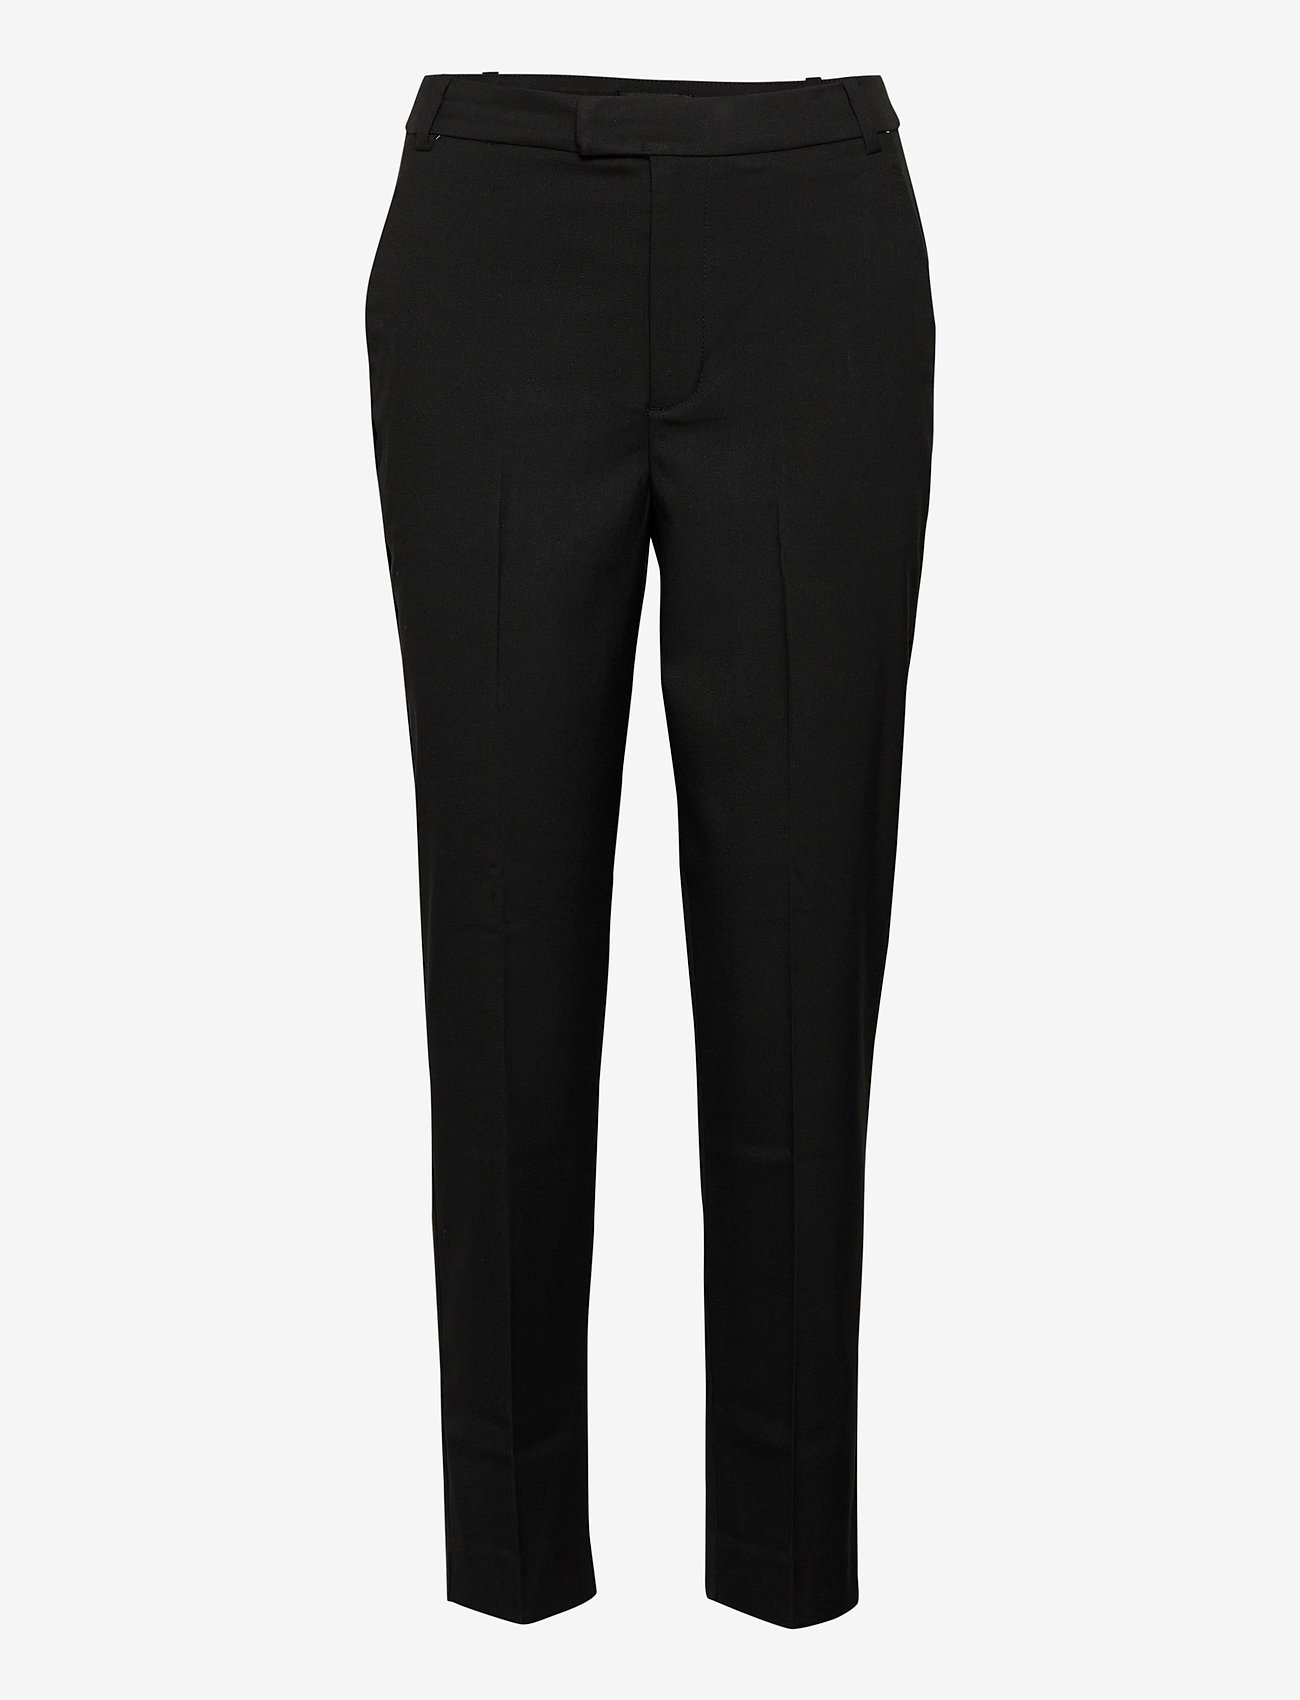 Lindex - Trousers Polly - tailored trousers - black - 1